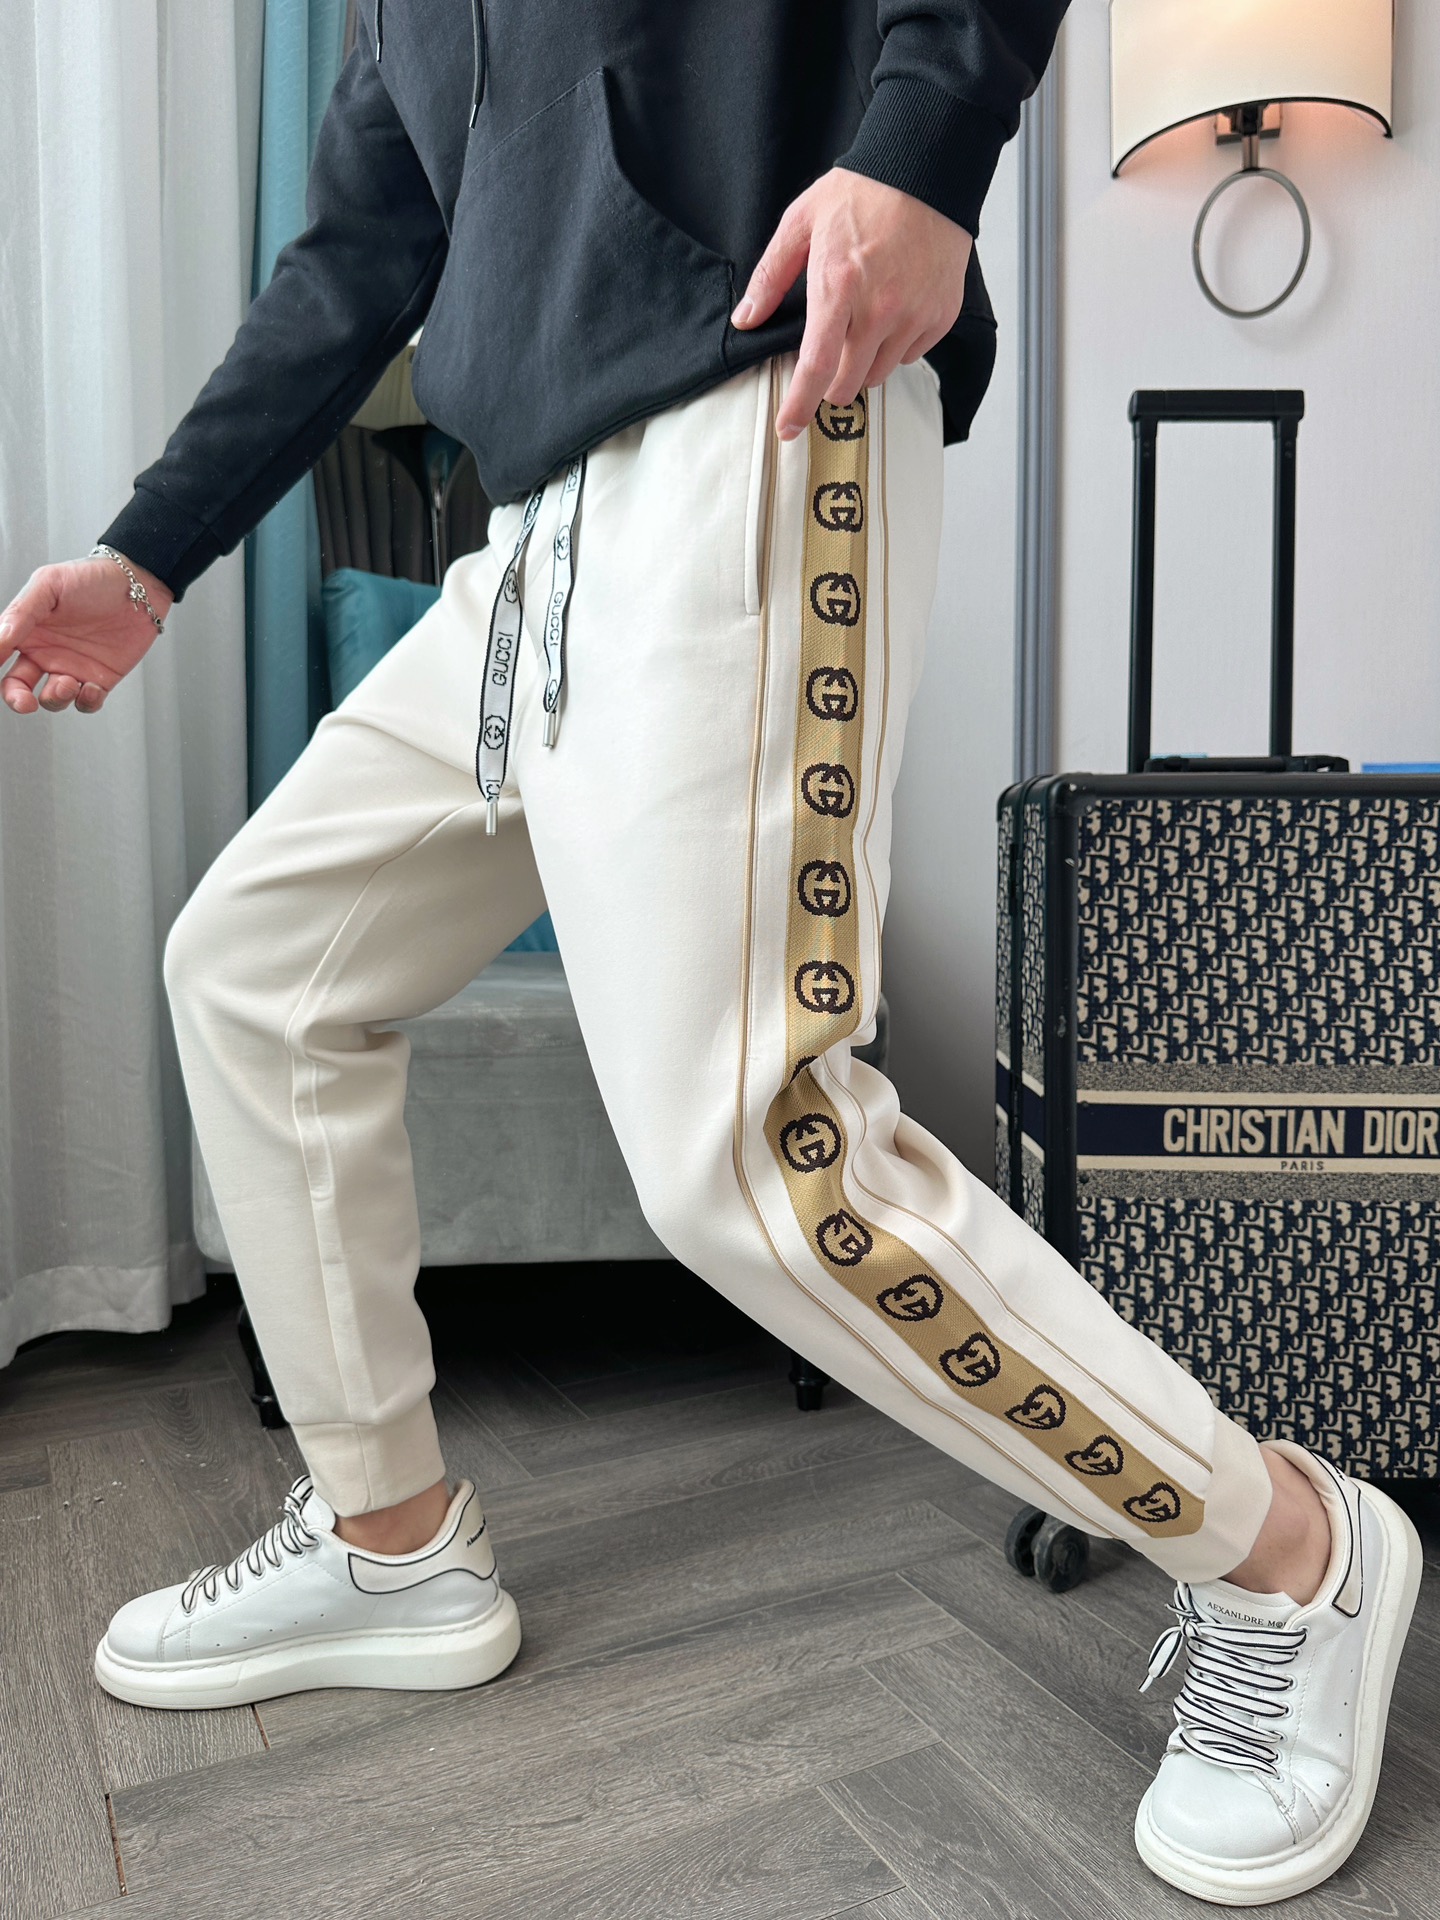 Gucci Clothing Pants & Trousers Spring Collection Casual